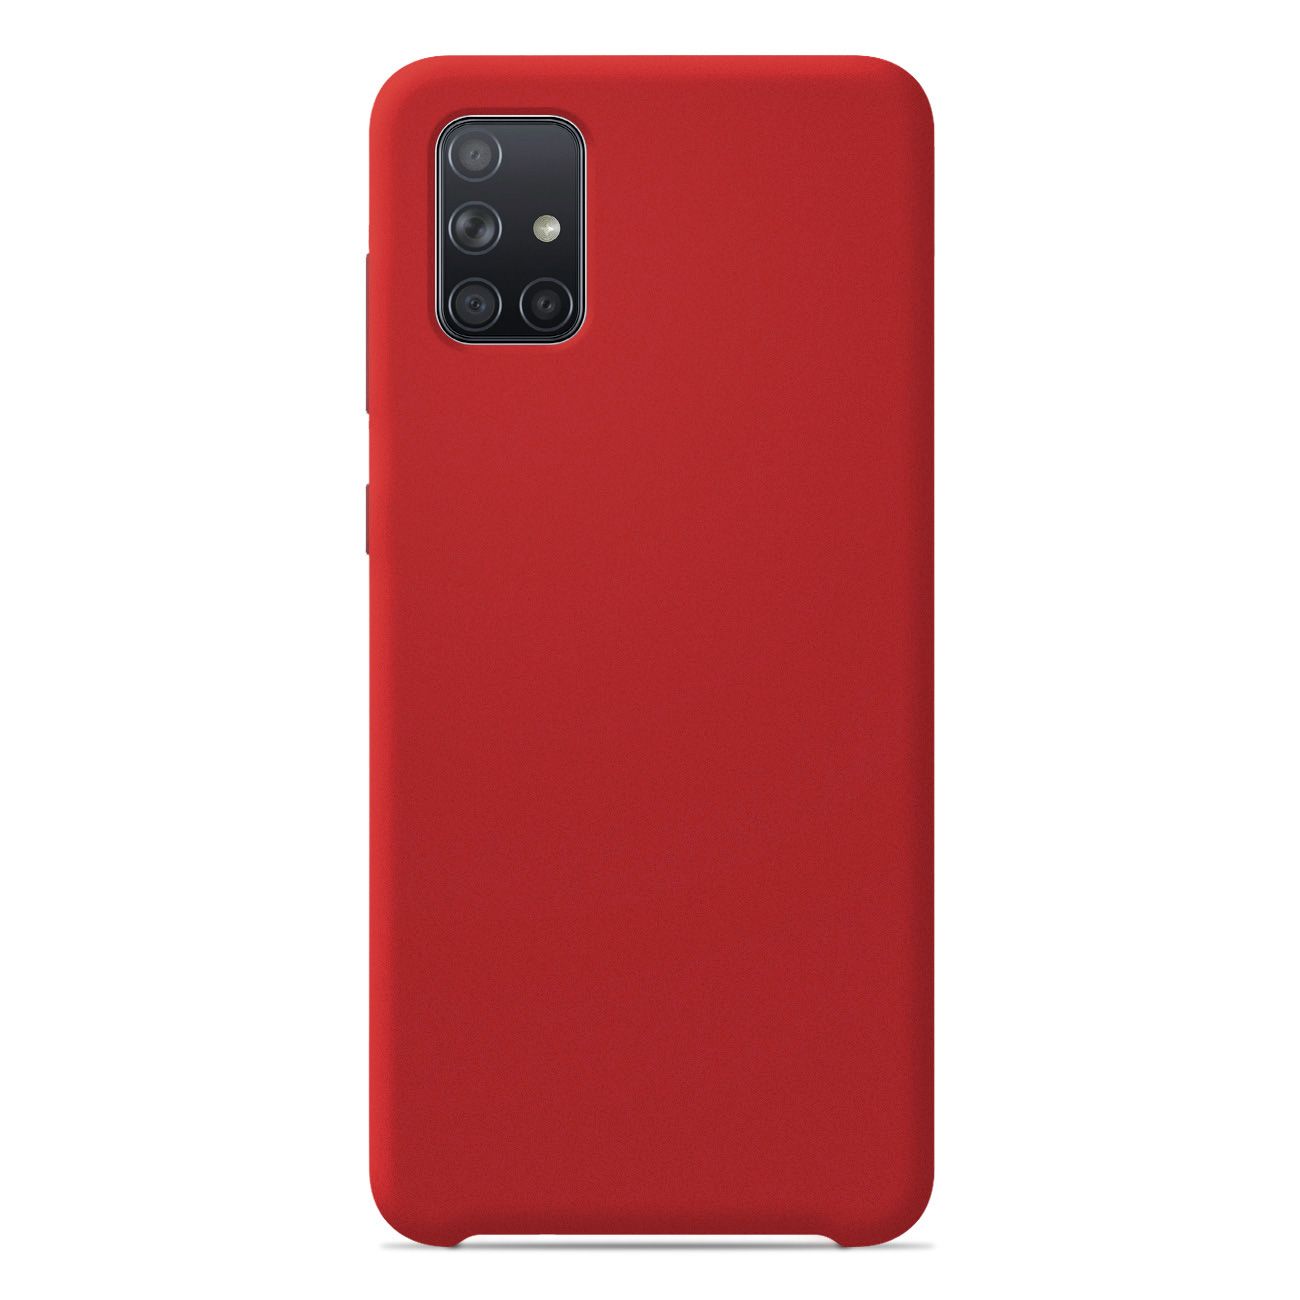 Coque silicone unie Soft Touch Rouge compatible Samsung Galaxy A51